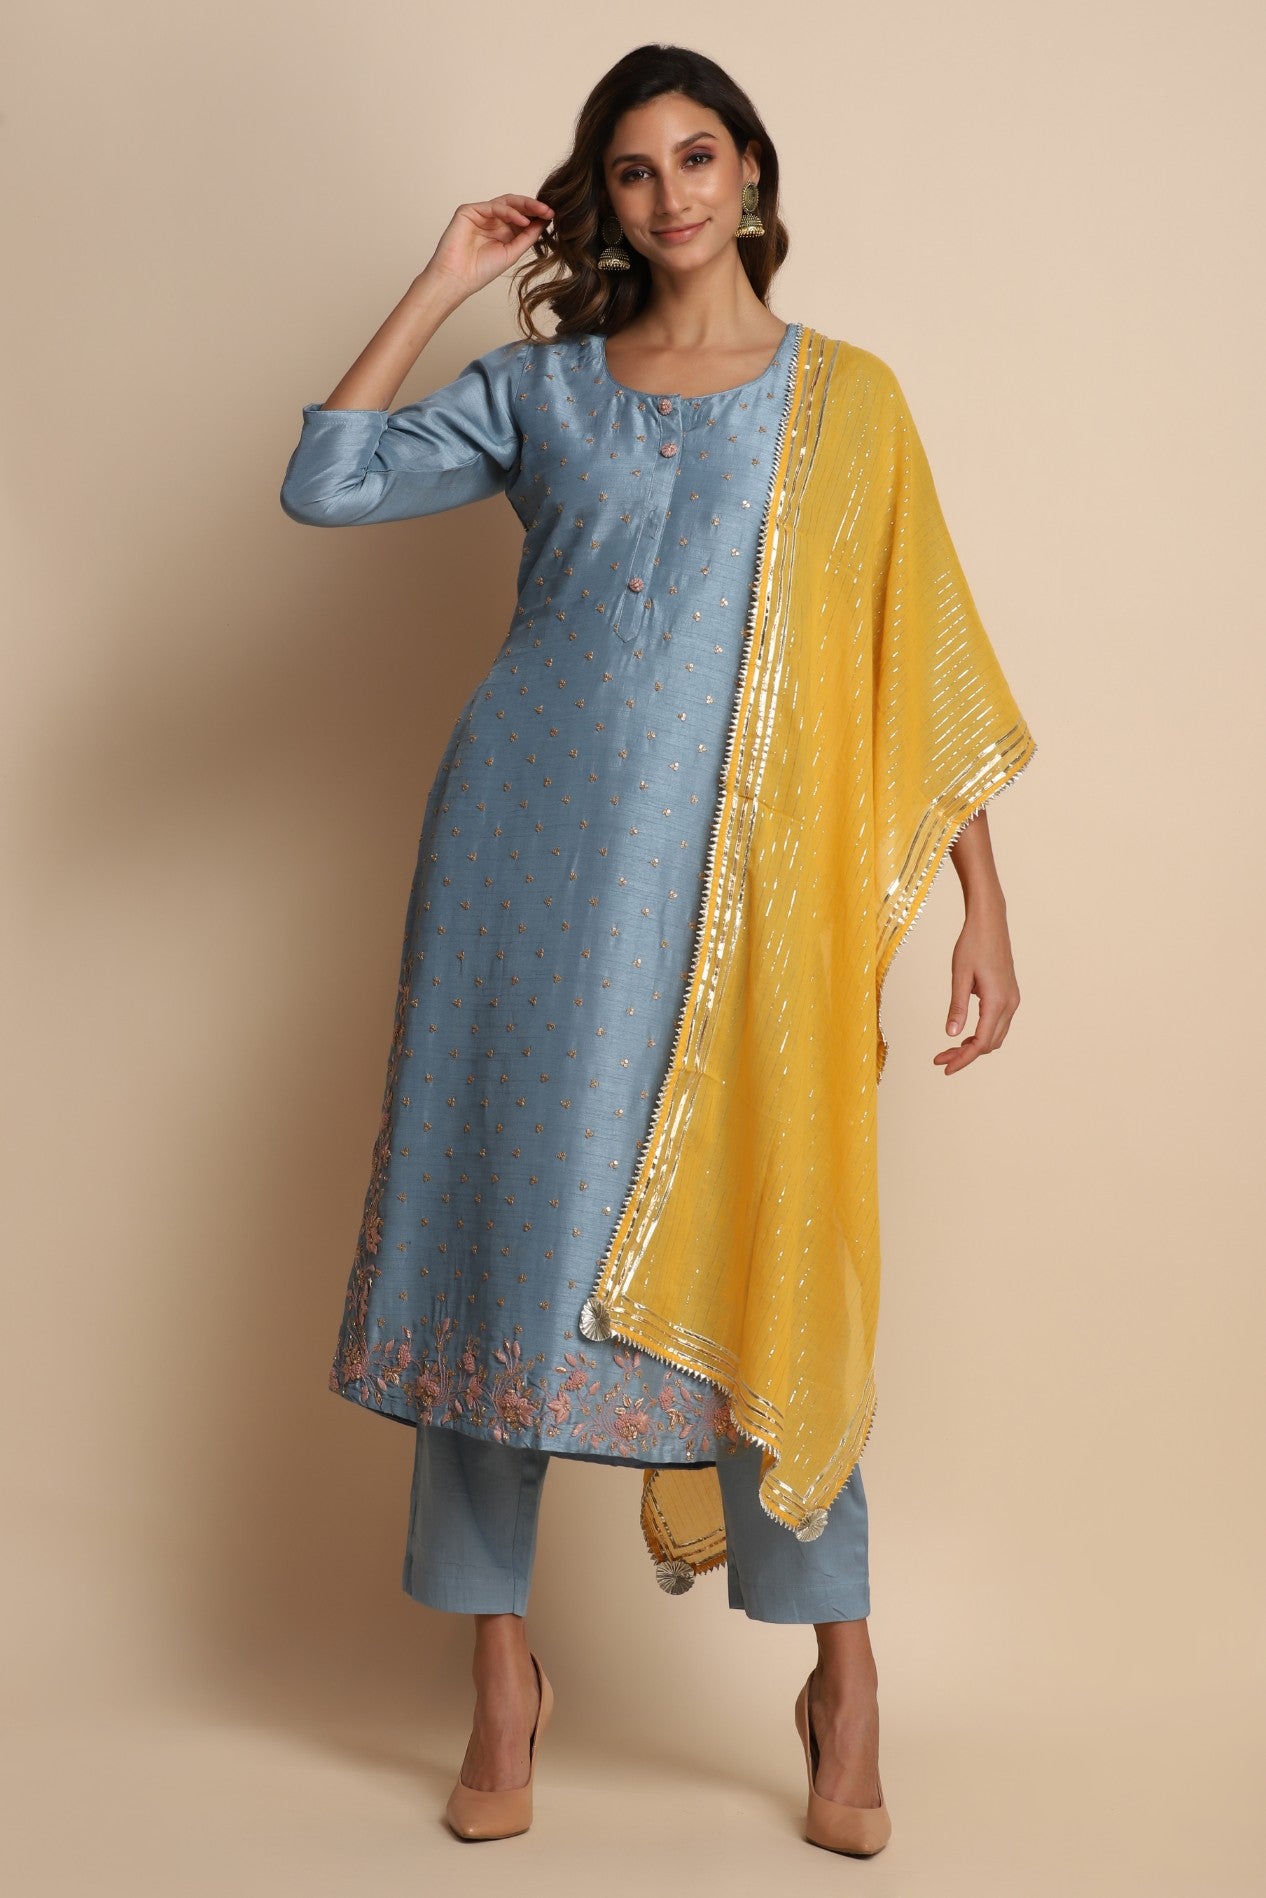 Traditional blue suit with highlights and yellow dupatta